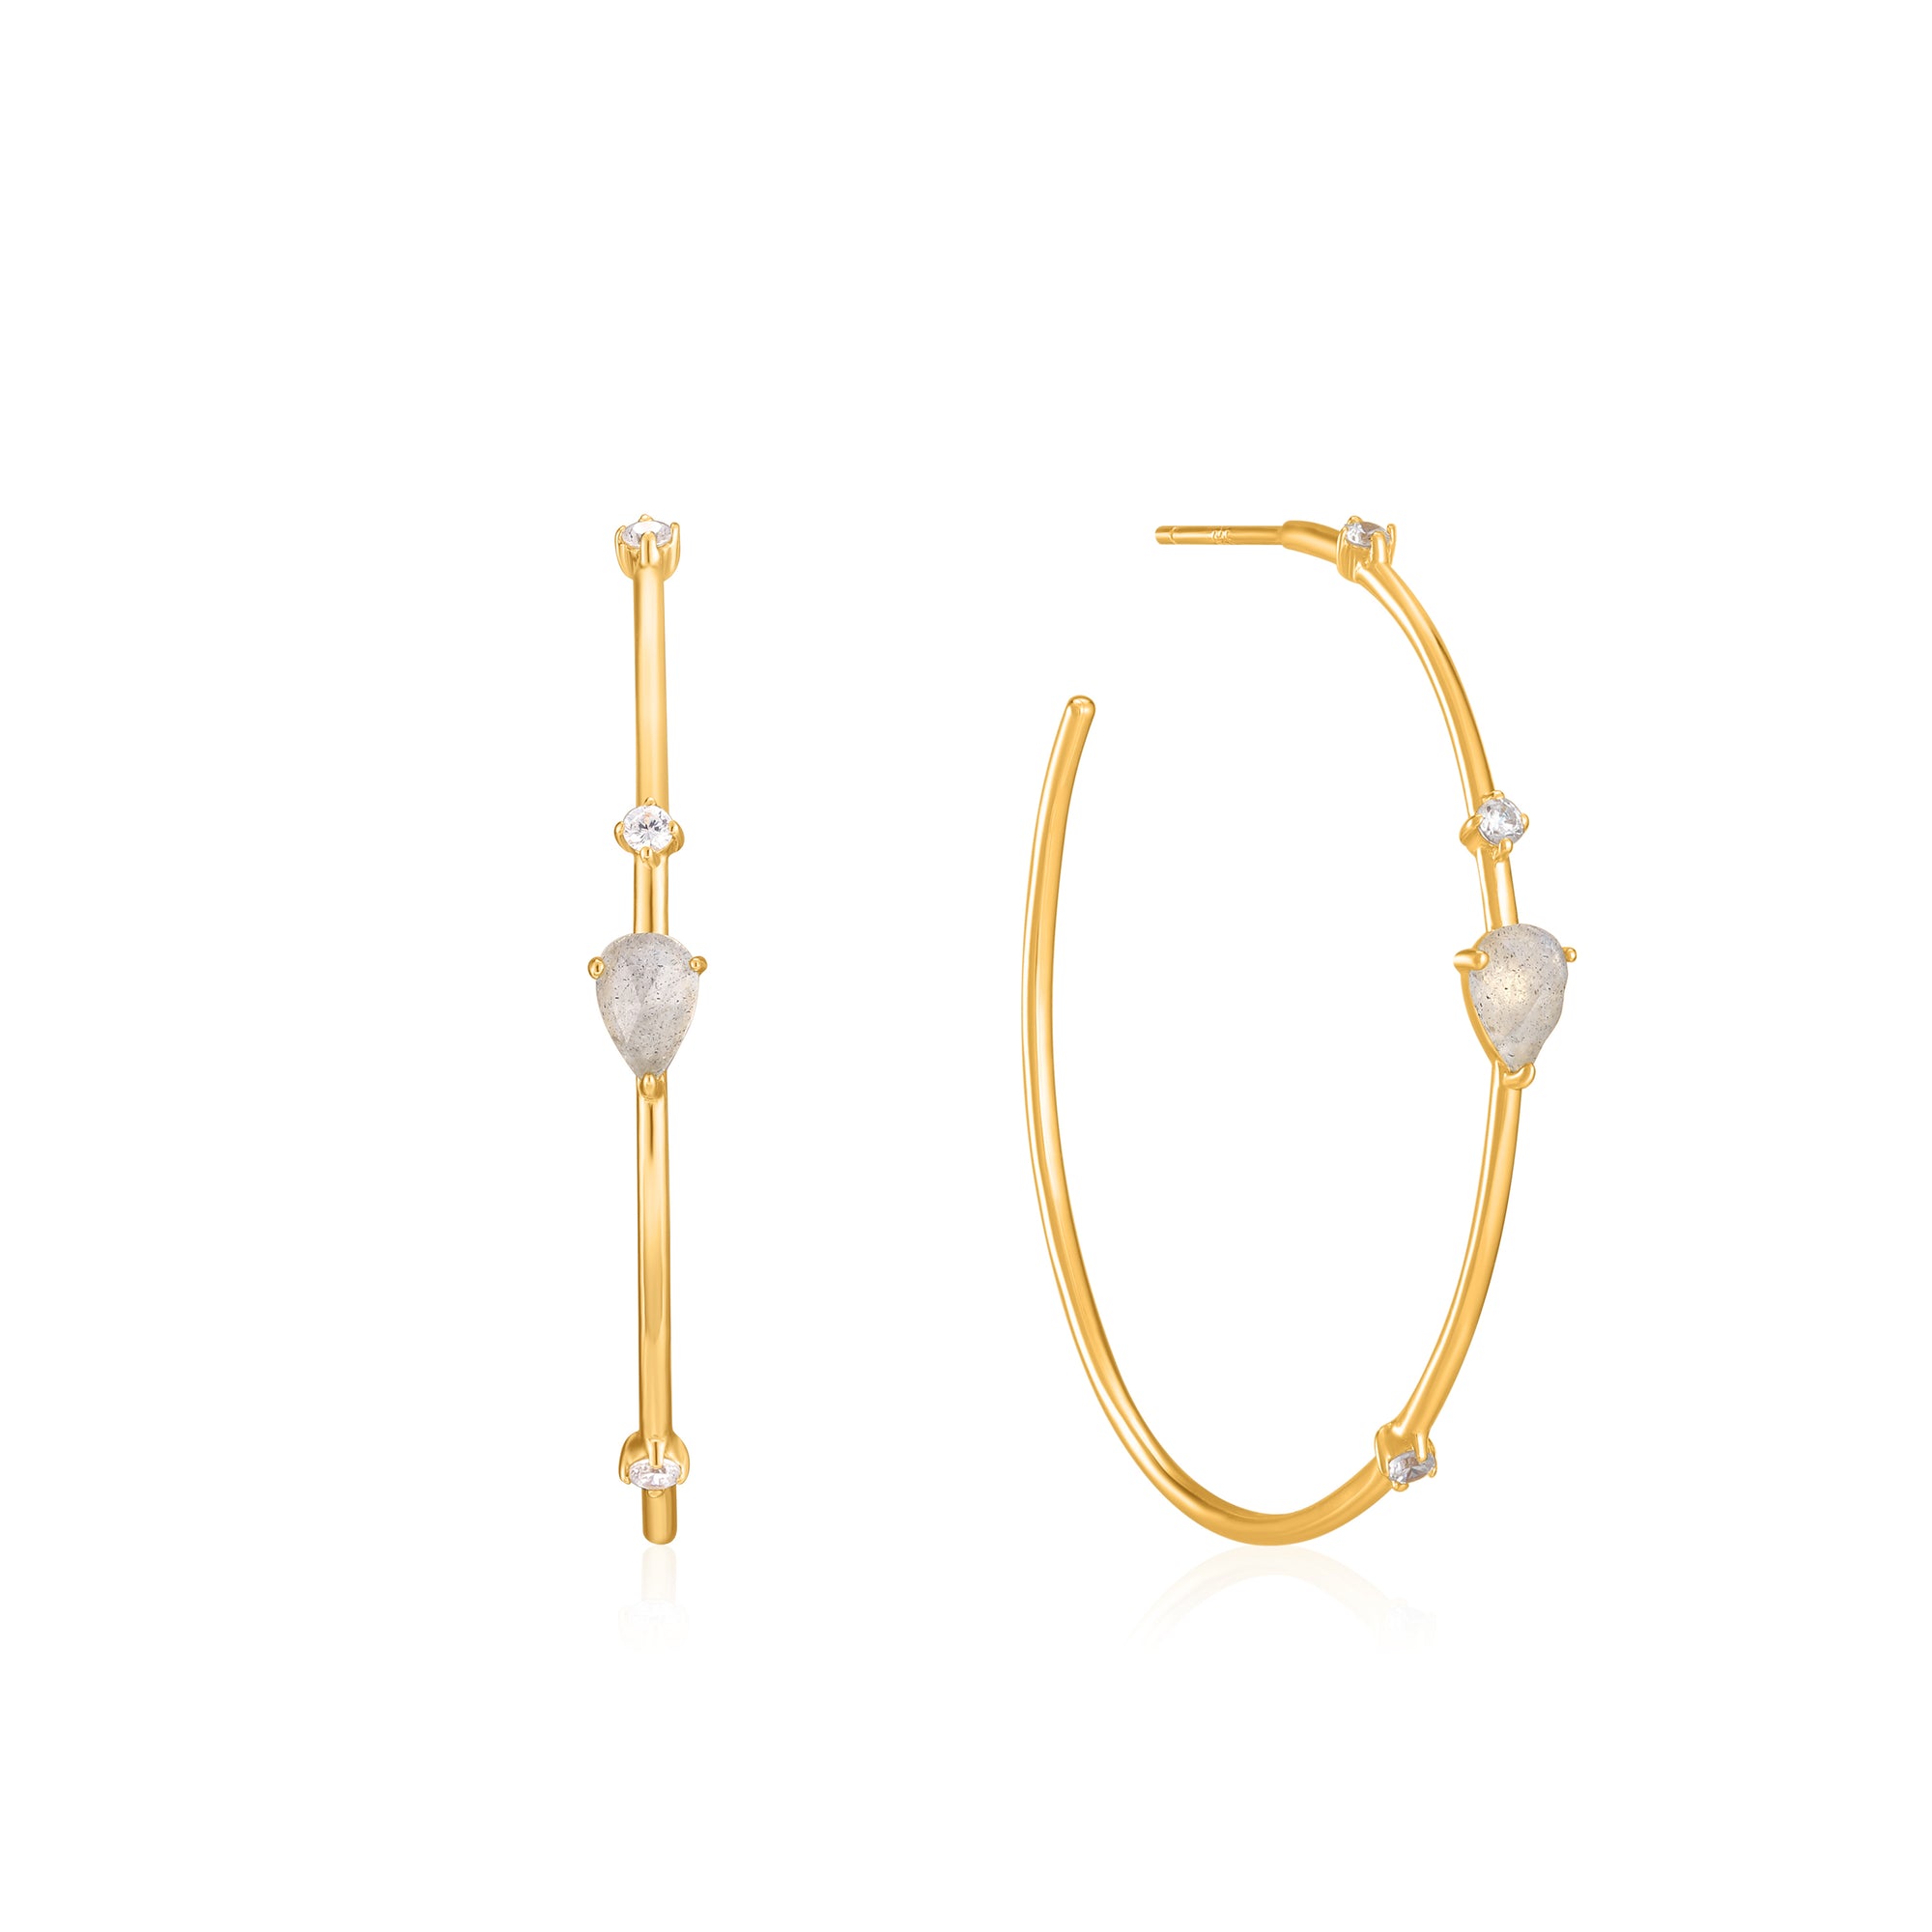 ANIA HAIE ANIA HAIE - Gold Midnight Hoop Earrings available at The Good Life Boutique